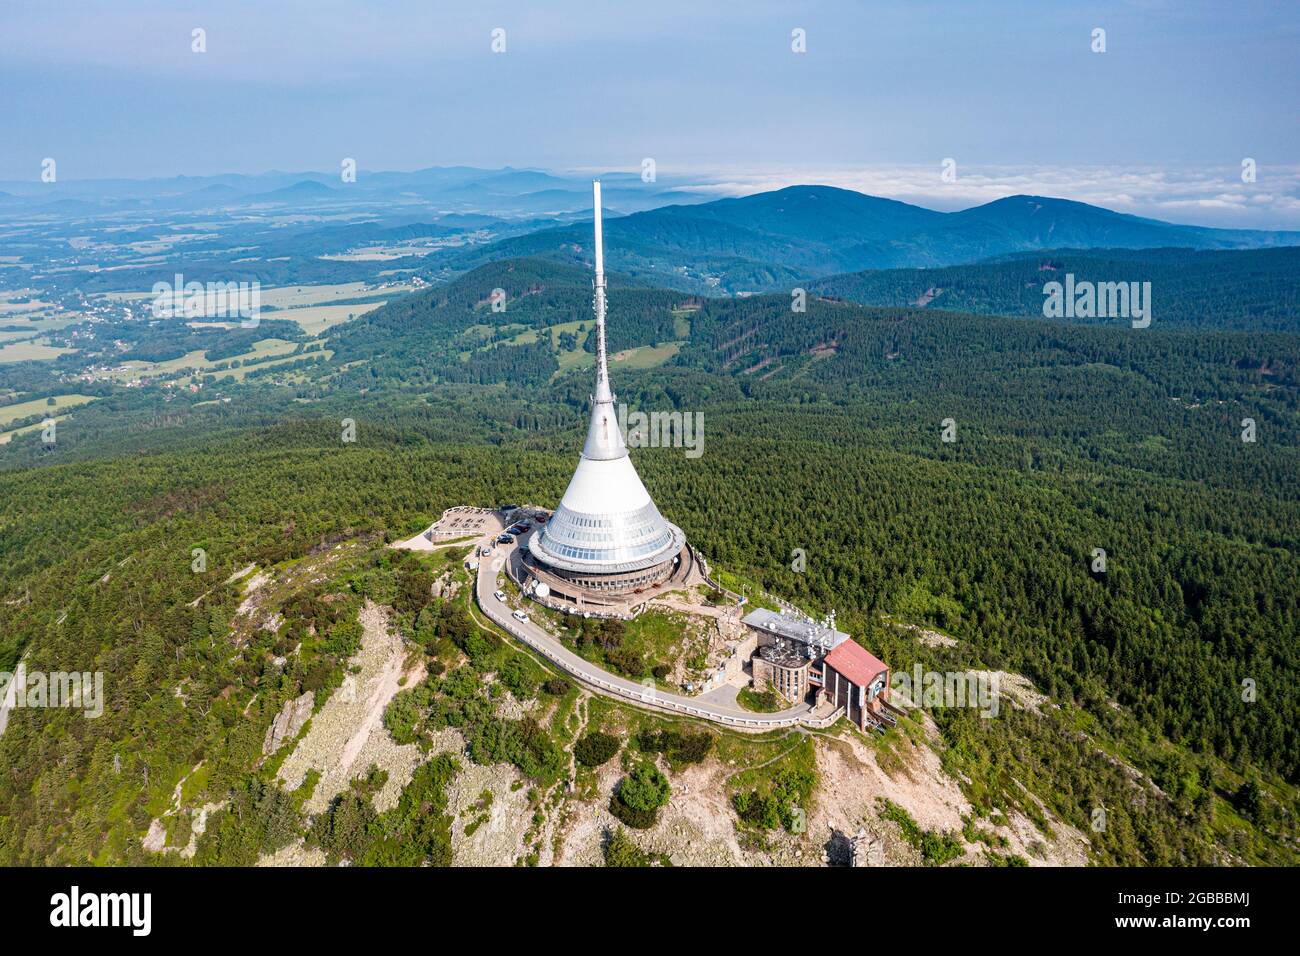 Aerial of the Jested Tower, a TV tower and hotel, the highest mountain peak of the Jested-Kozakov Ridge, Jested, Czech Republic, Europe Stock Photo